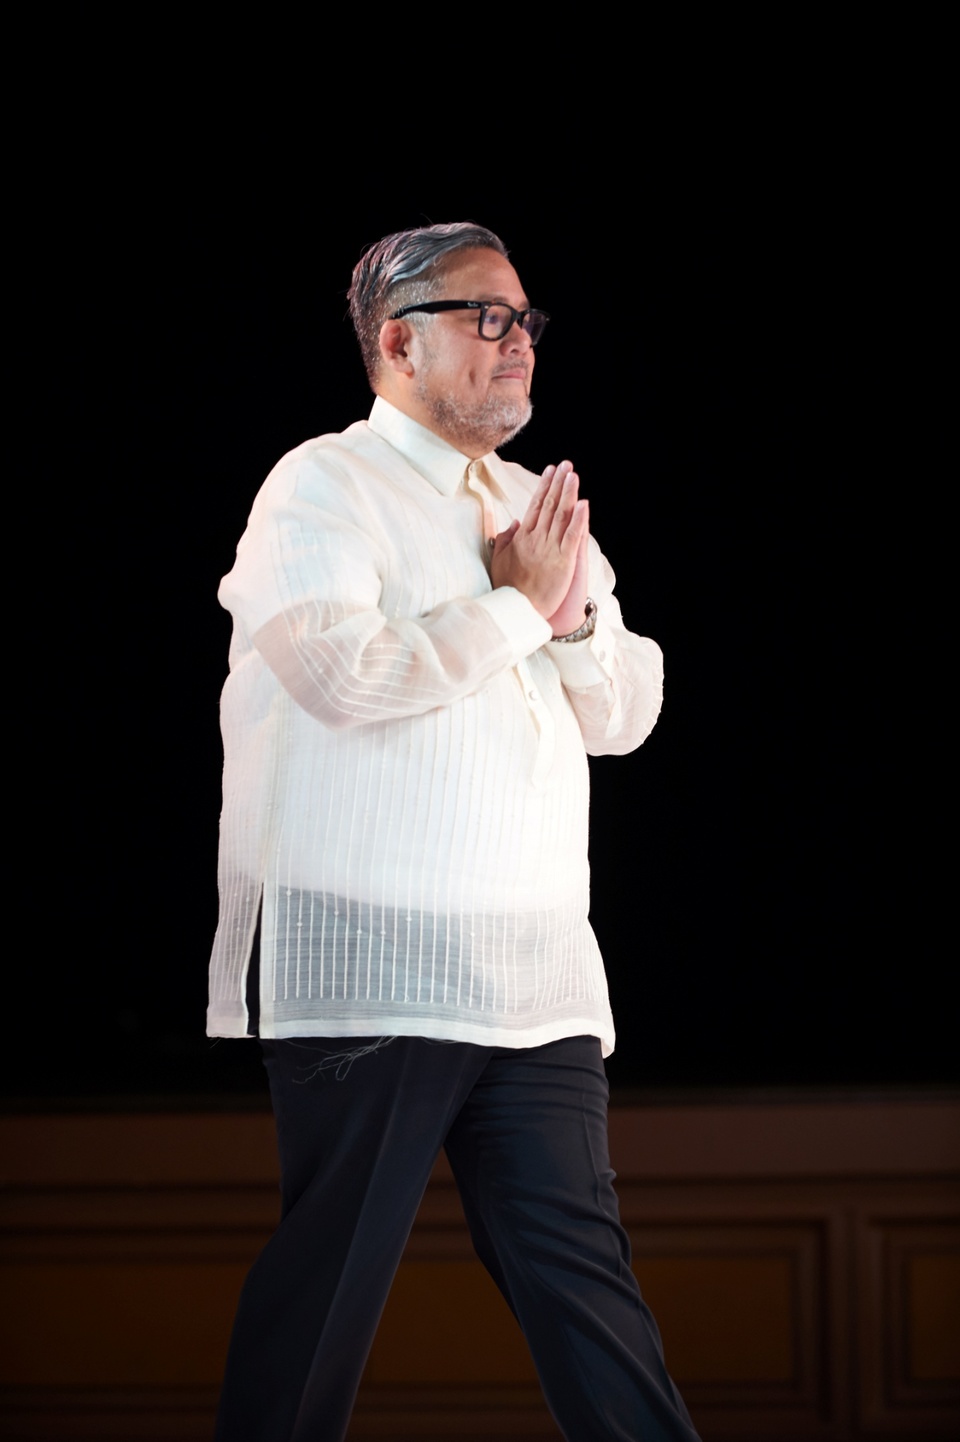 Rajo Laurel held his first ever Independence Day Fashion Show in Tokyo featuring some of his best collections – Pintados, Black, White, Nude and Hanami.